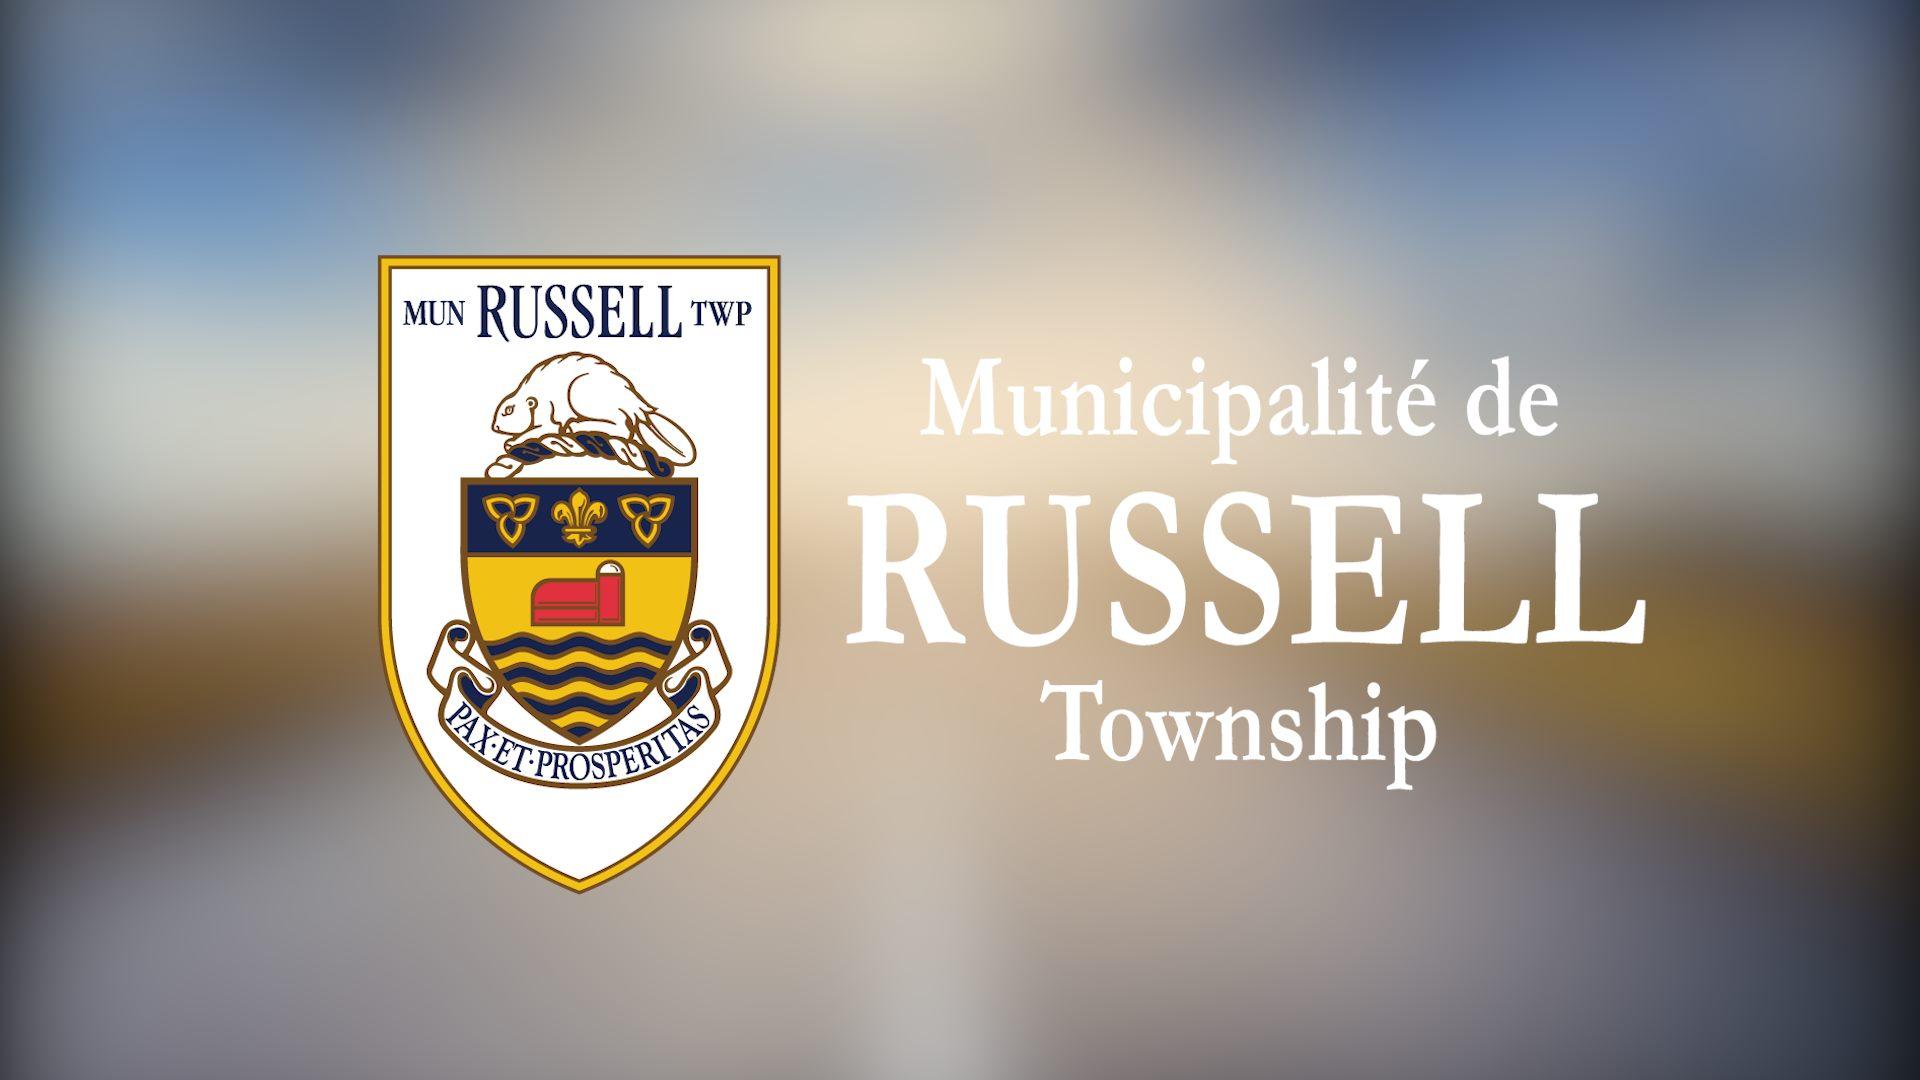 Russell Township name will not change, but its namesake will